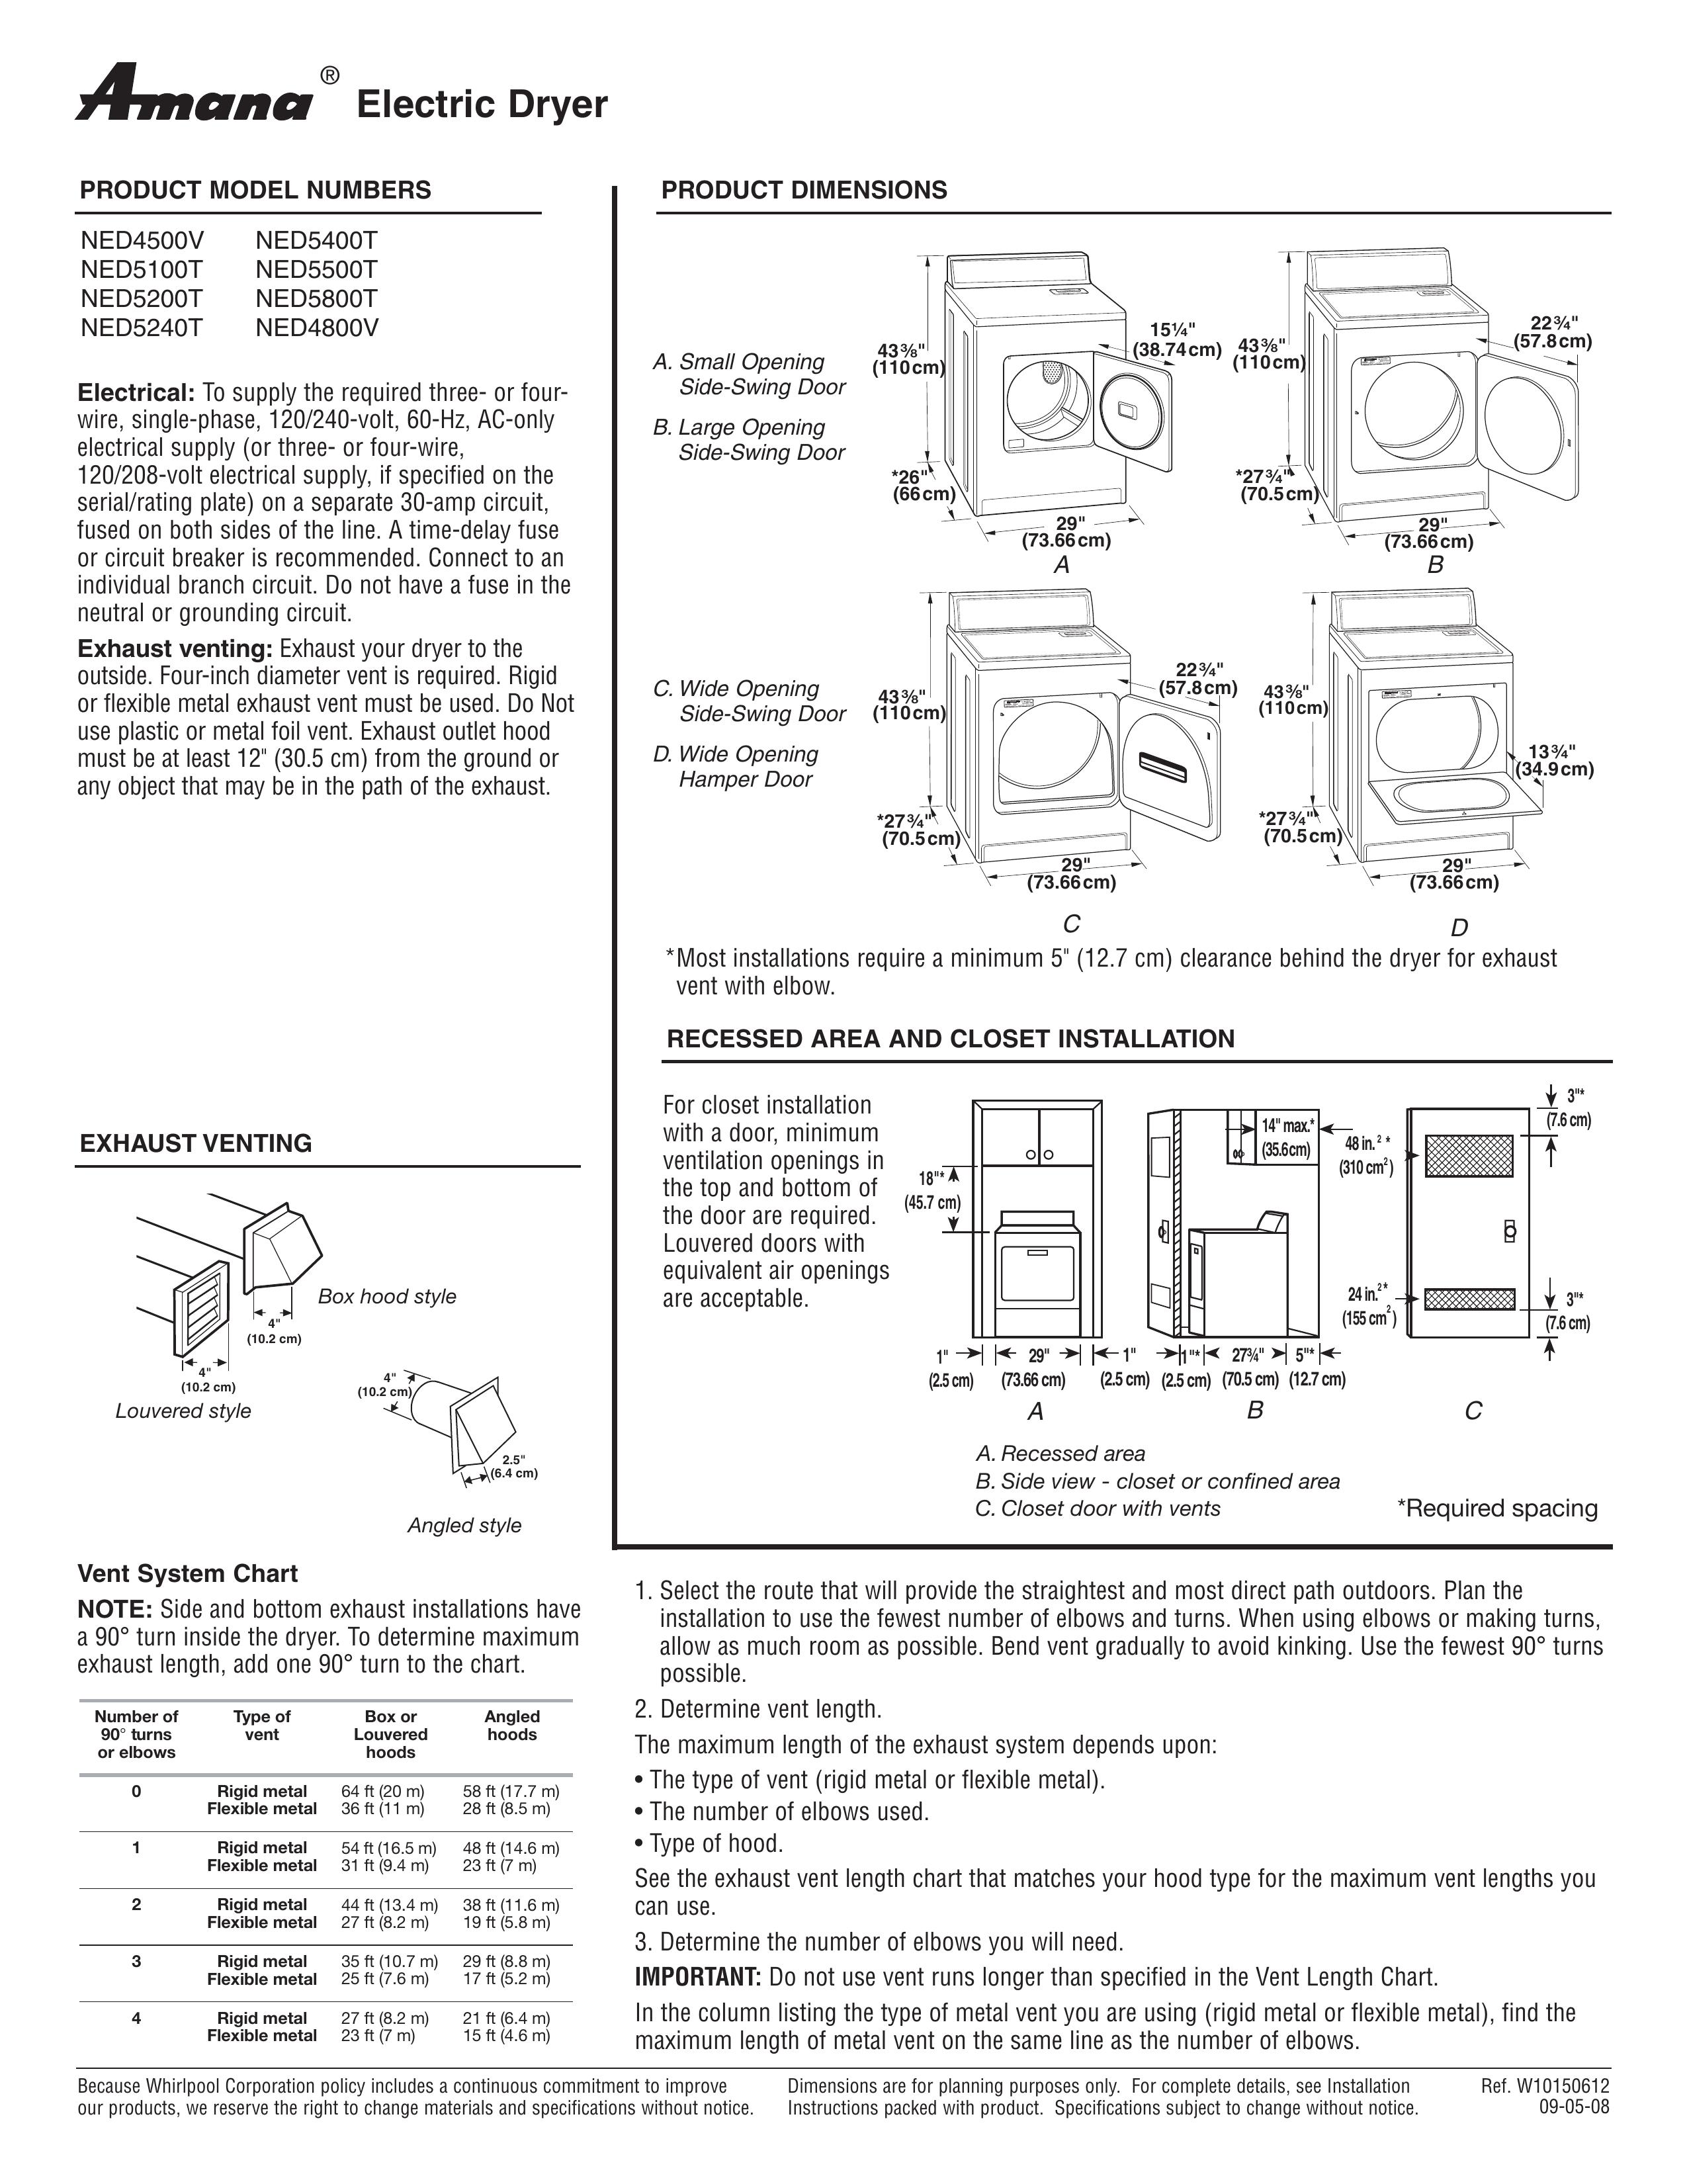 Amana NED5200T Clothes Dryer User Manual